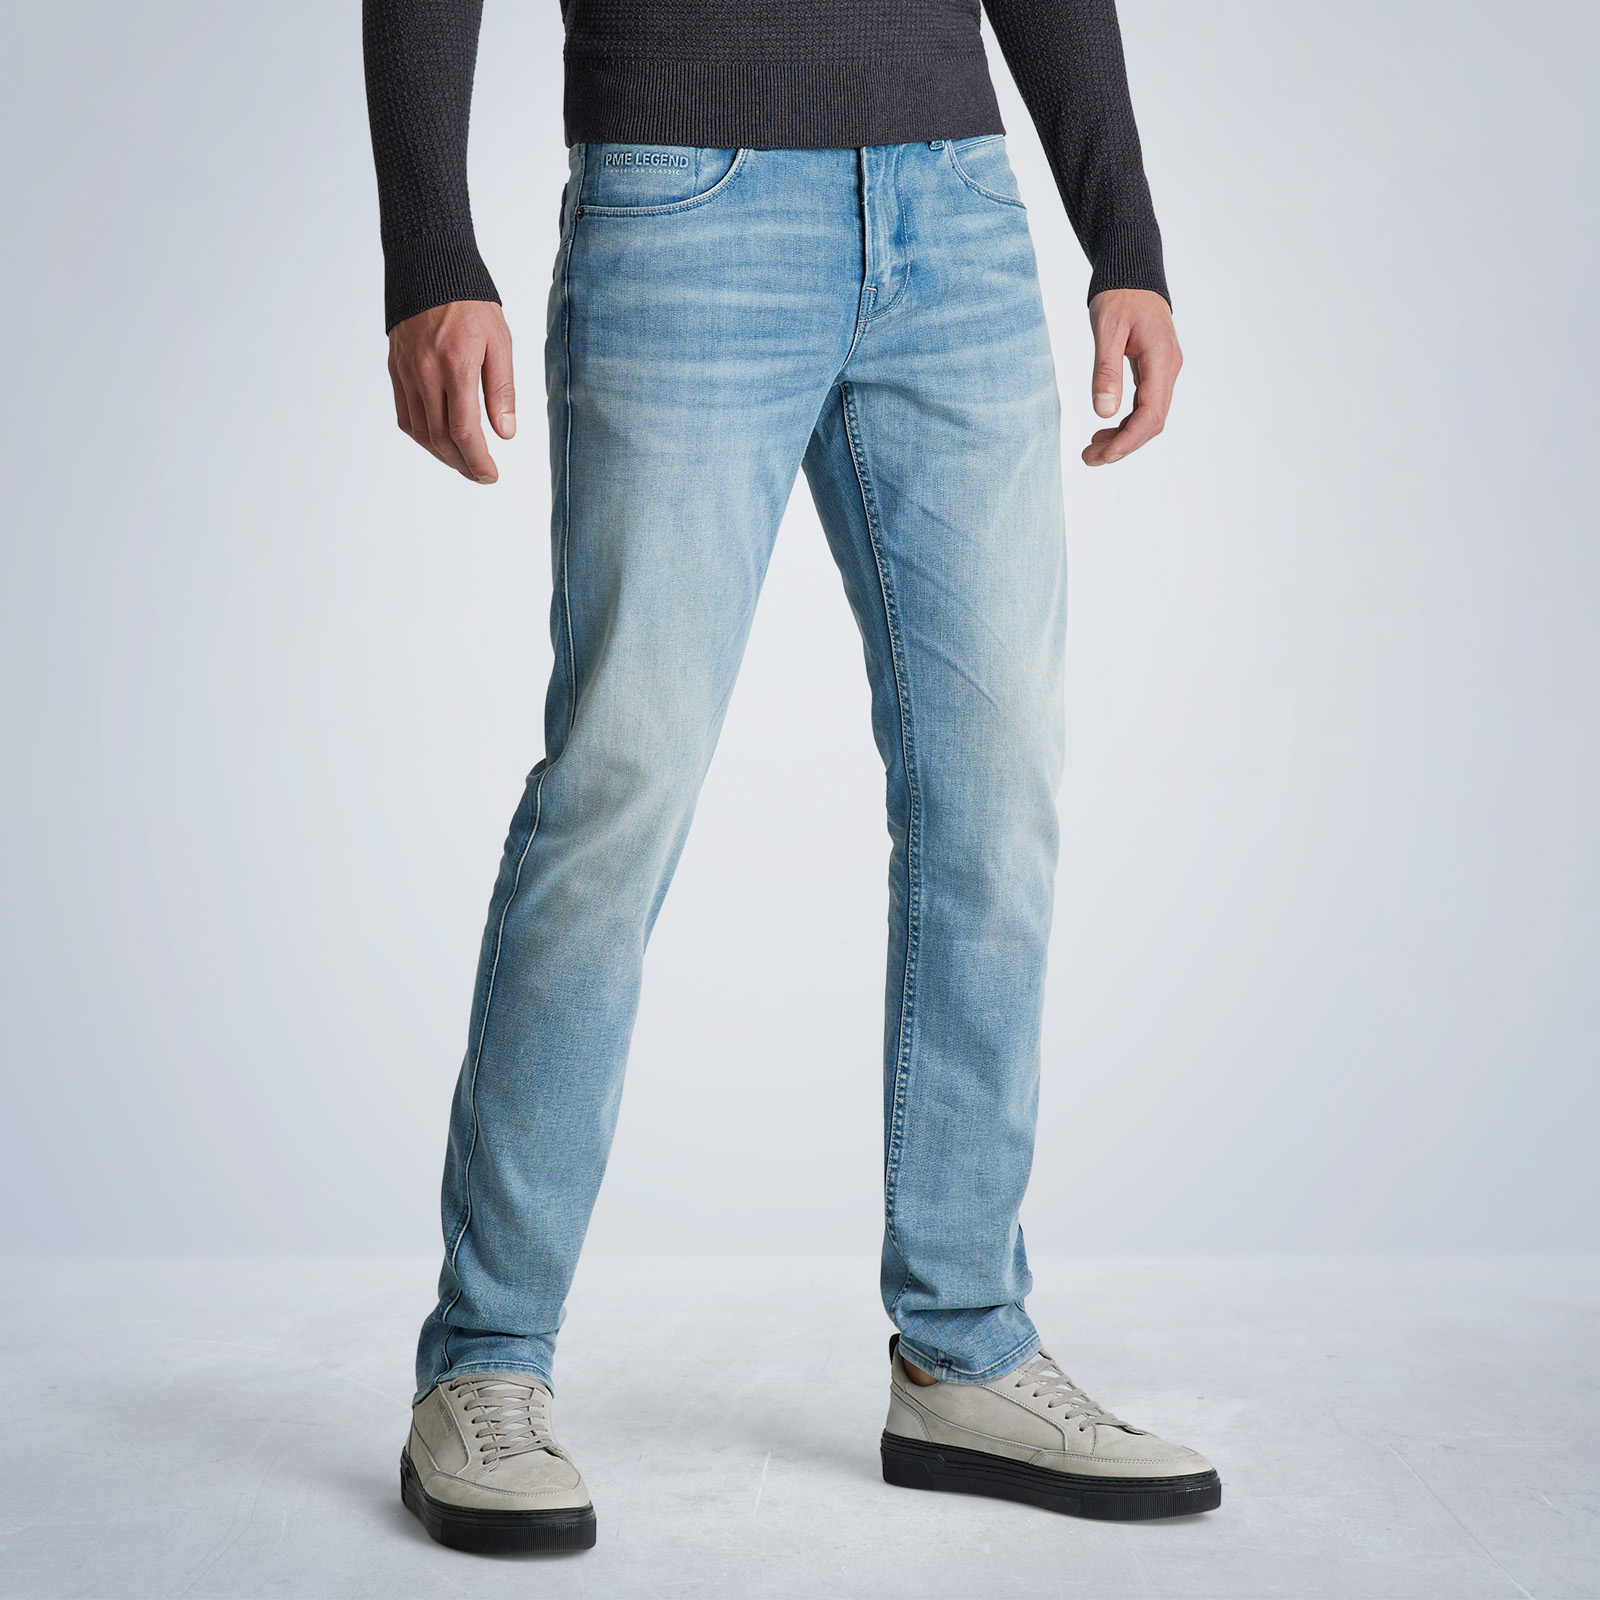 PME LEGEND | PME Legend Nightflight jeans | Free shipping and returns